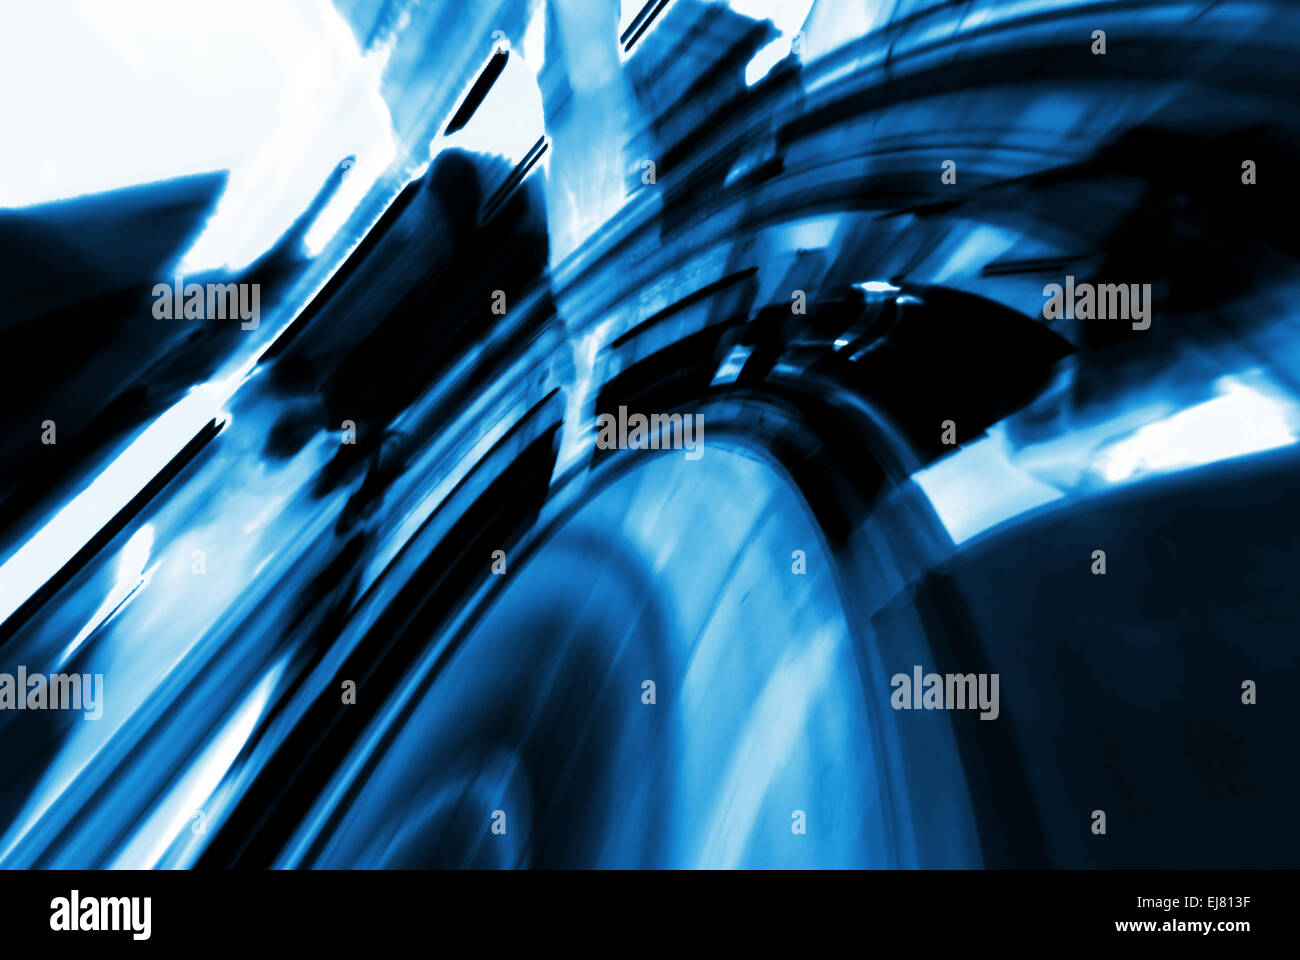 Abstract Graphic Art Stock Photo